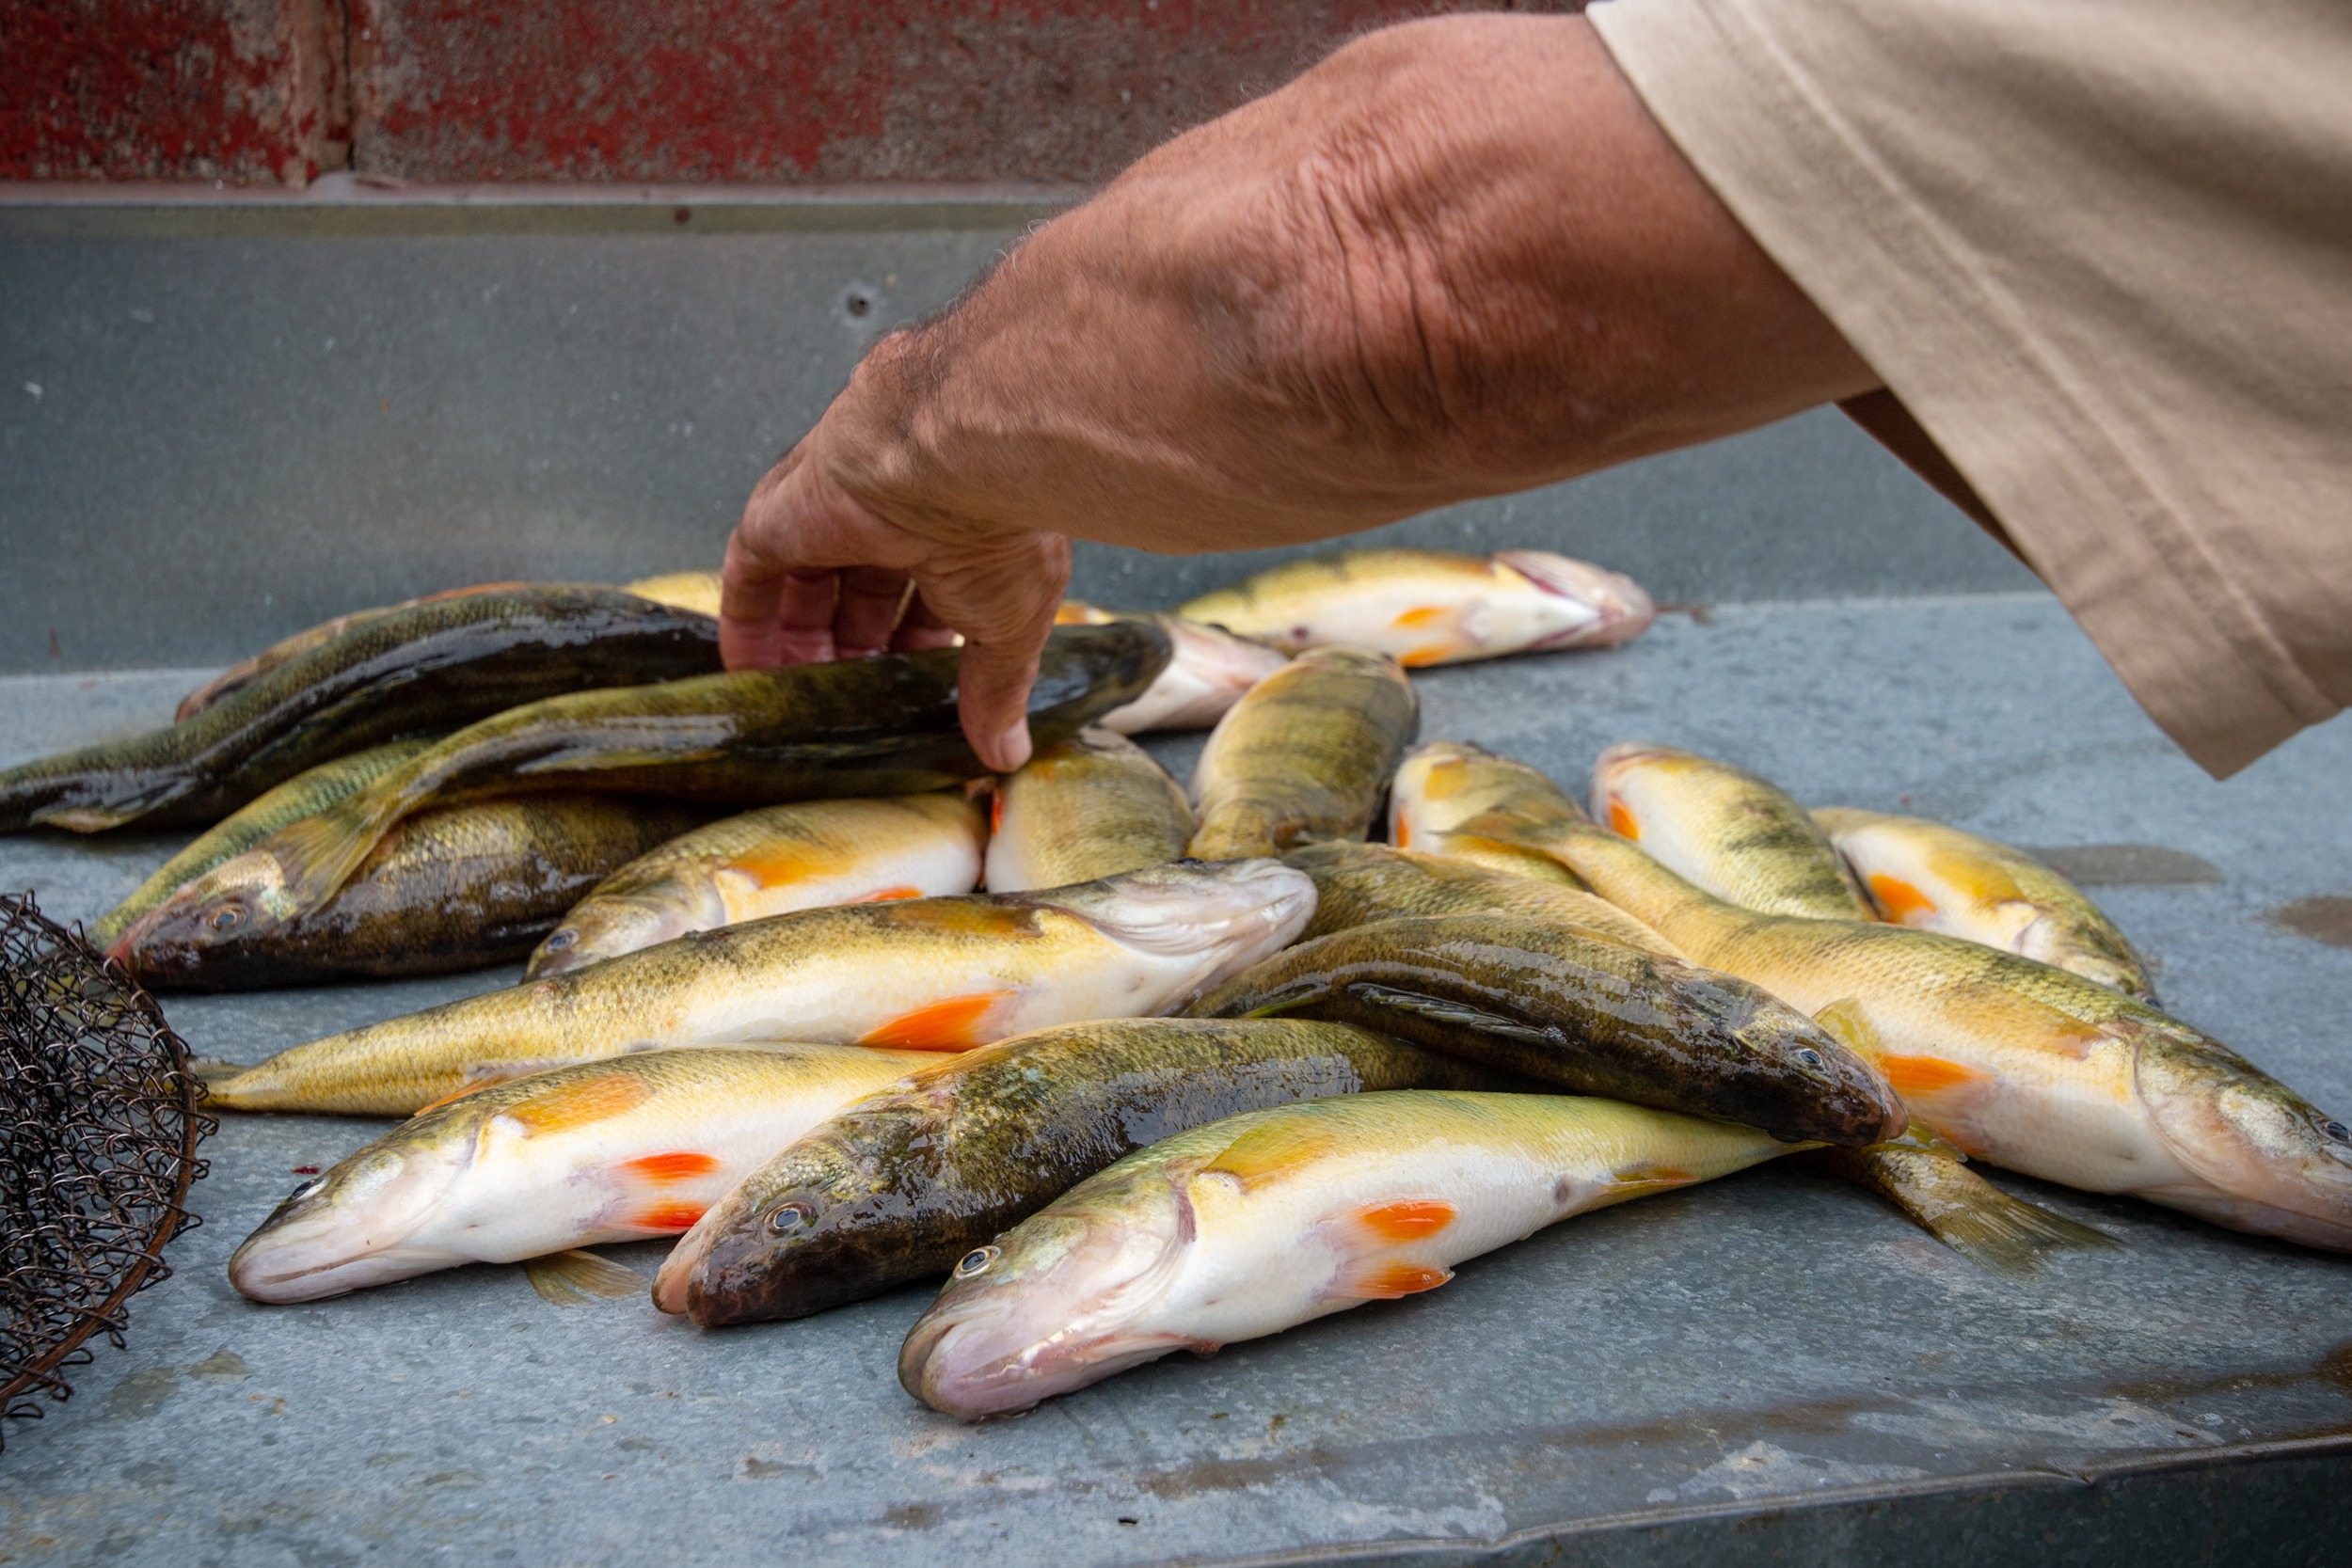 A man's hand moving one fish in a pile laid out on a table